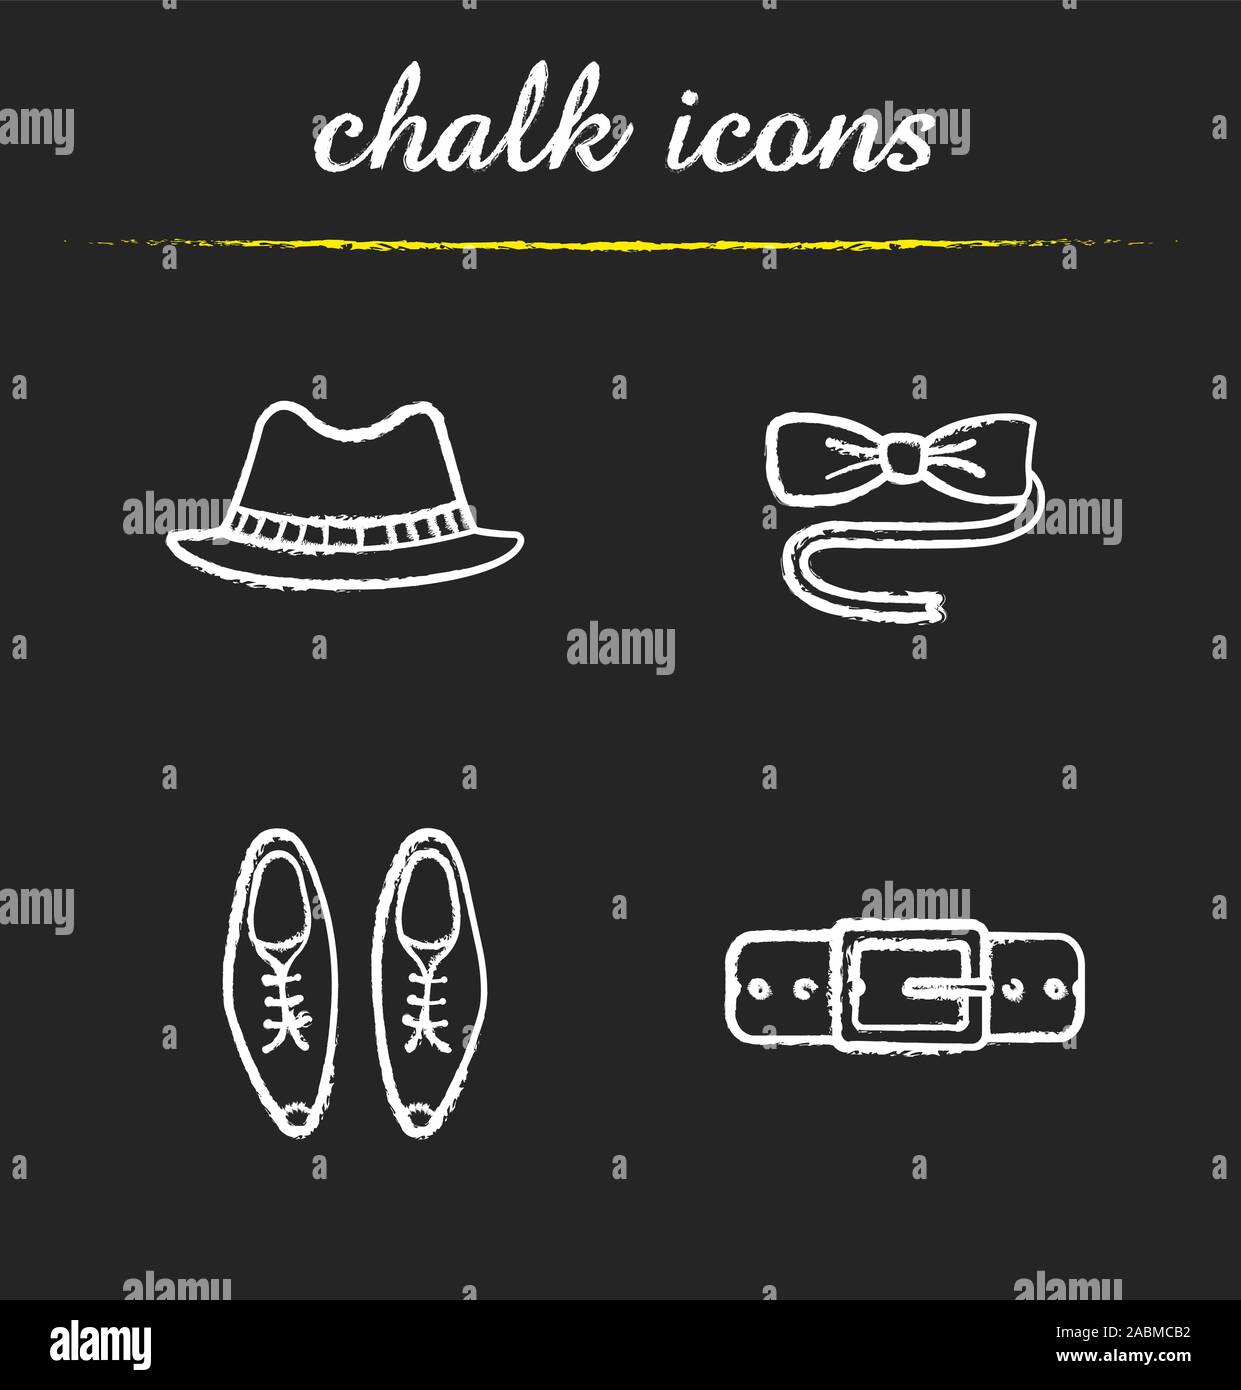 Men's accessories chalk icons set. Homburg hat, butterfly tie, classic shoes, leather belt. Isolated vector chalkboard illustrations Stock Vector